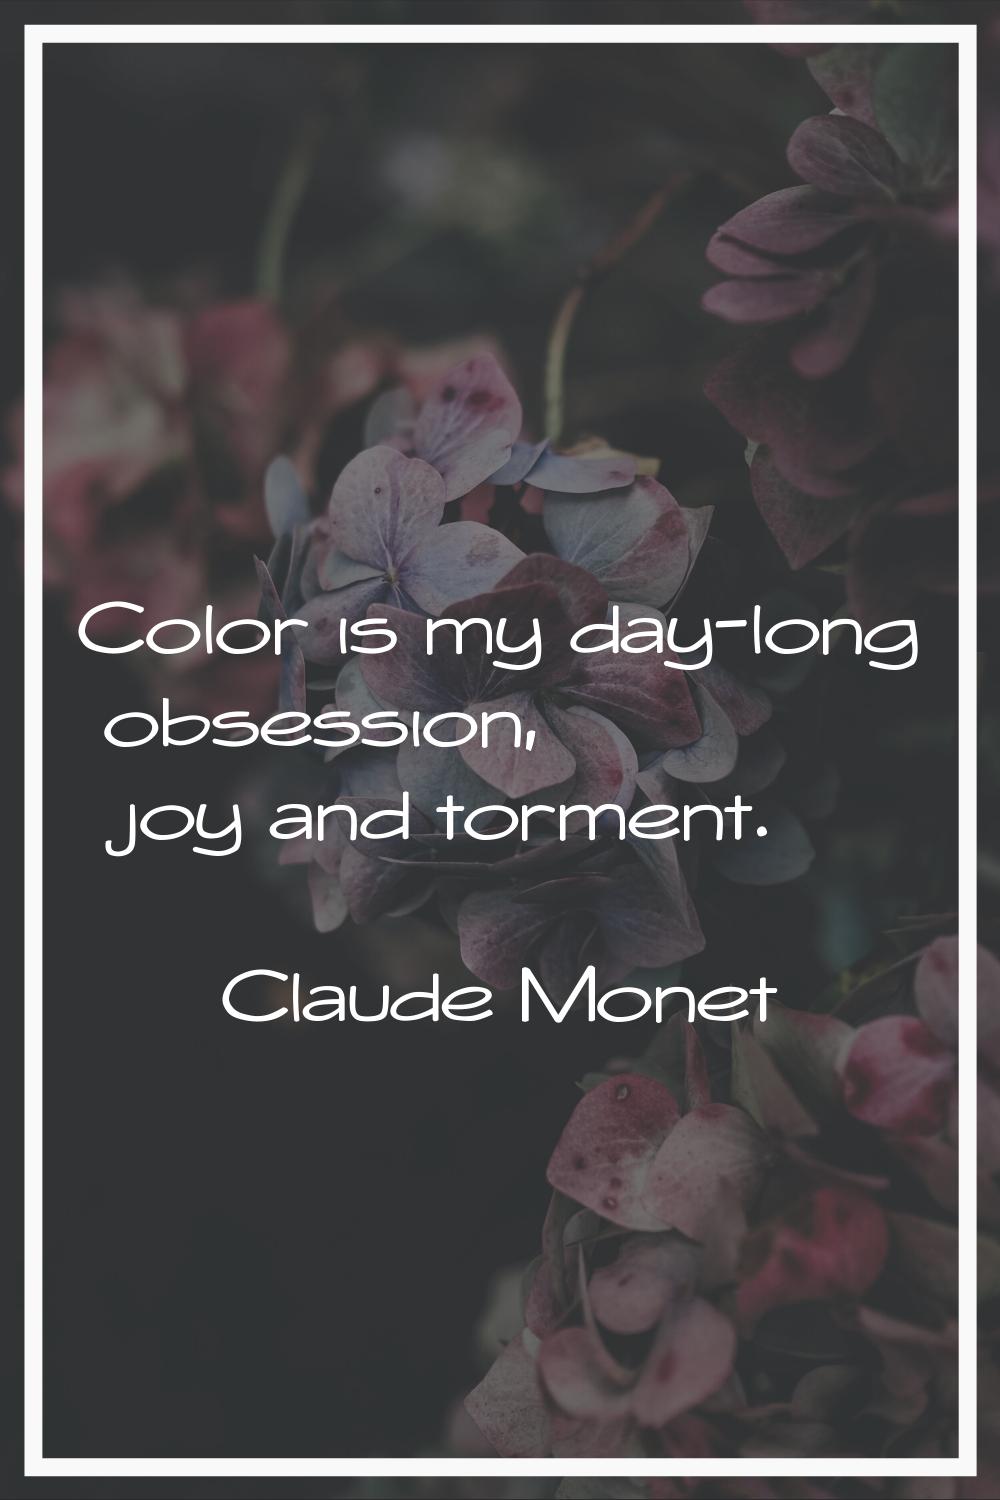 Color is my day-long obsession, joy and torment.